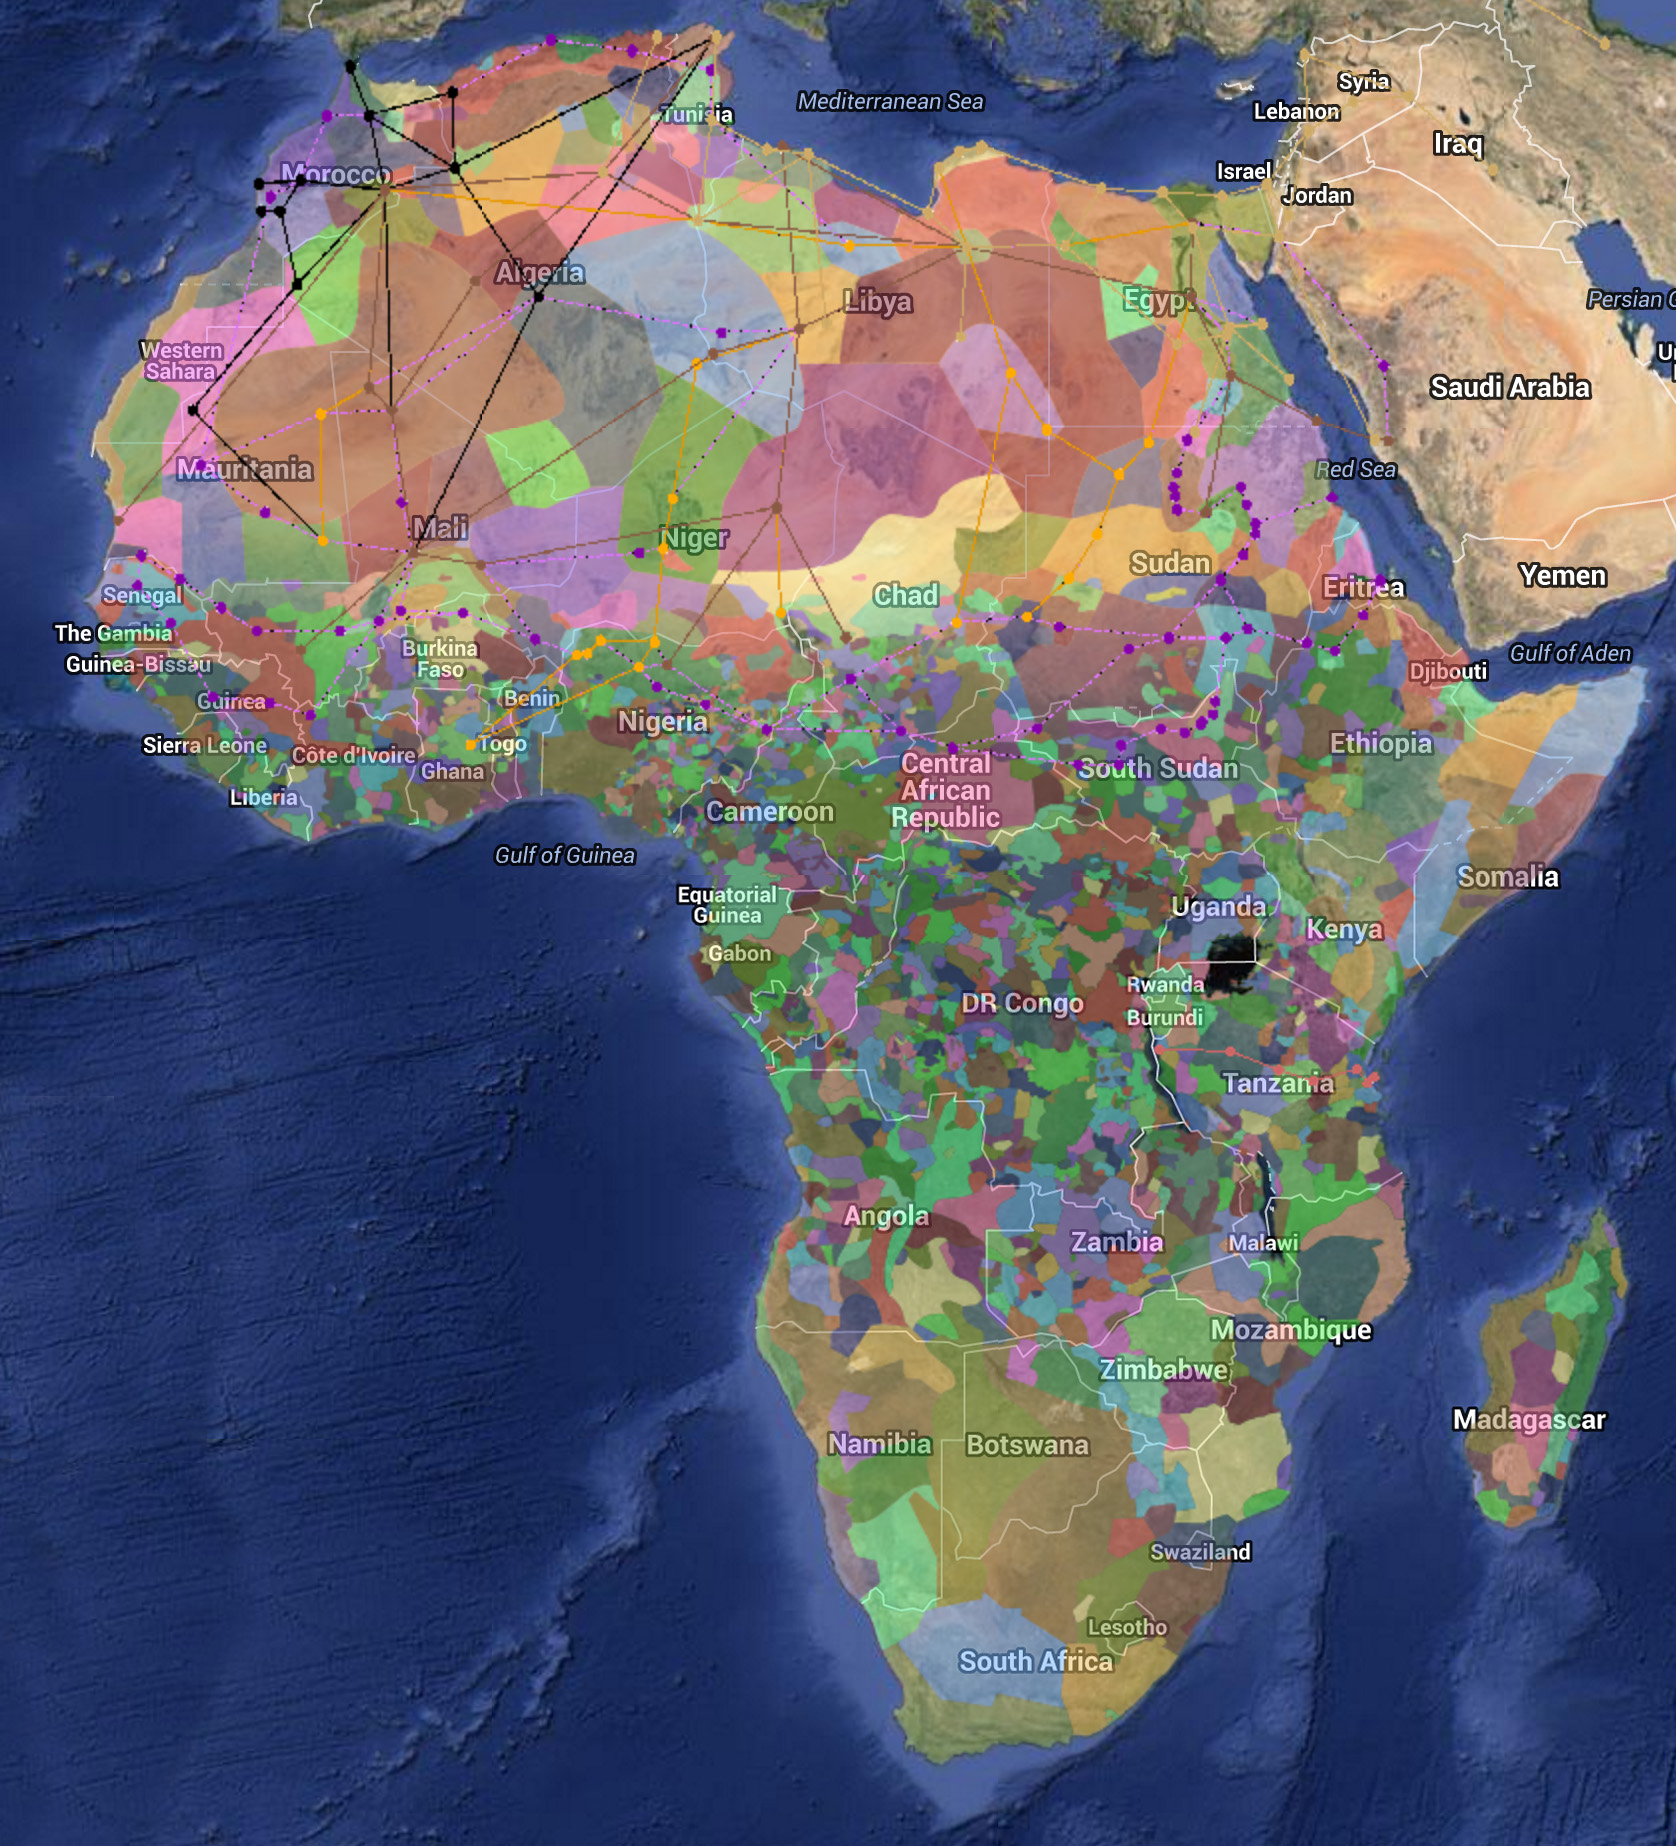 If you haven't already seen this Harvard University map of ethnicity in Africa, based on data from a 2001 book edited by anthropologist Marc Leo Felix